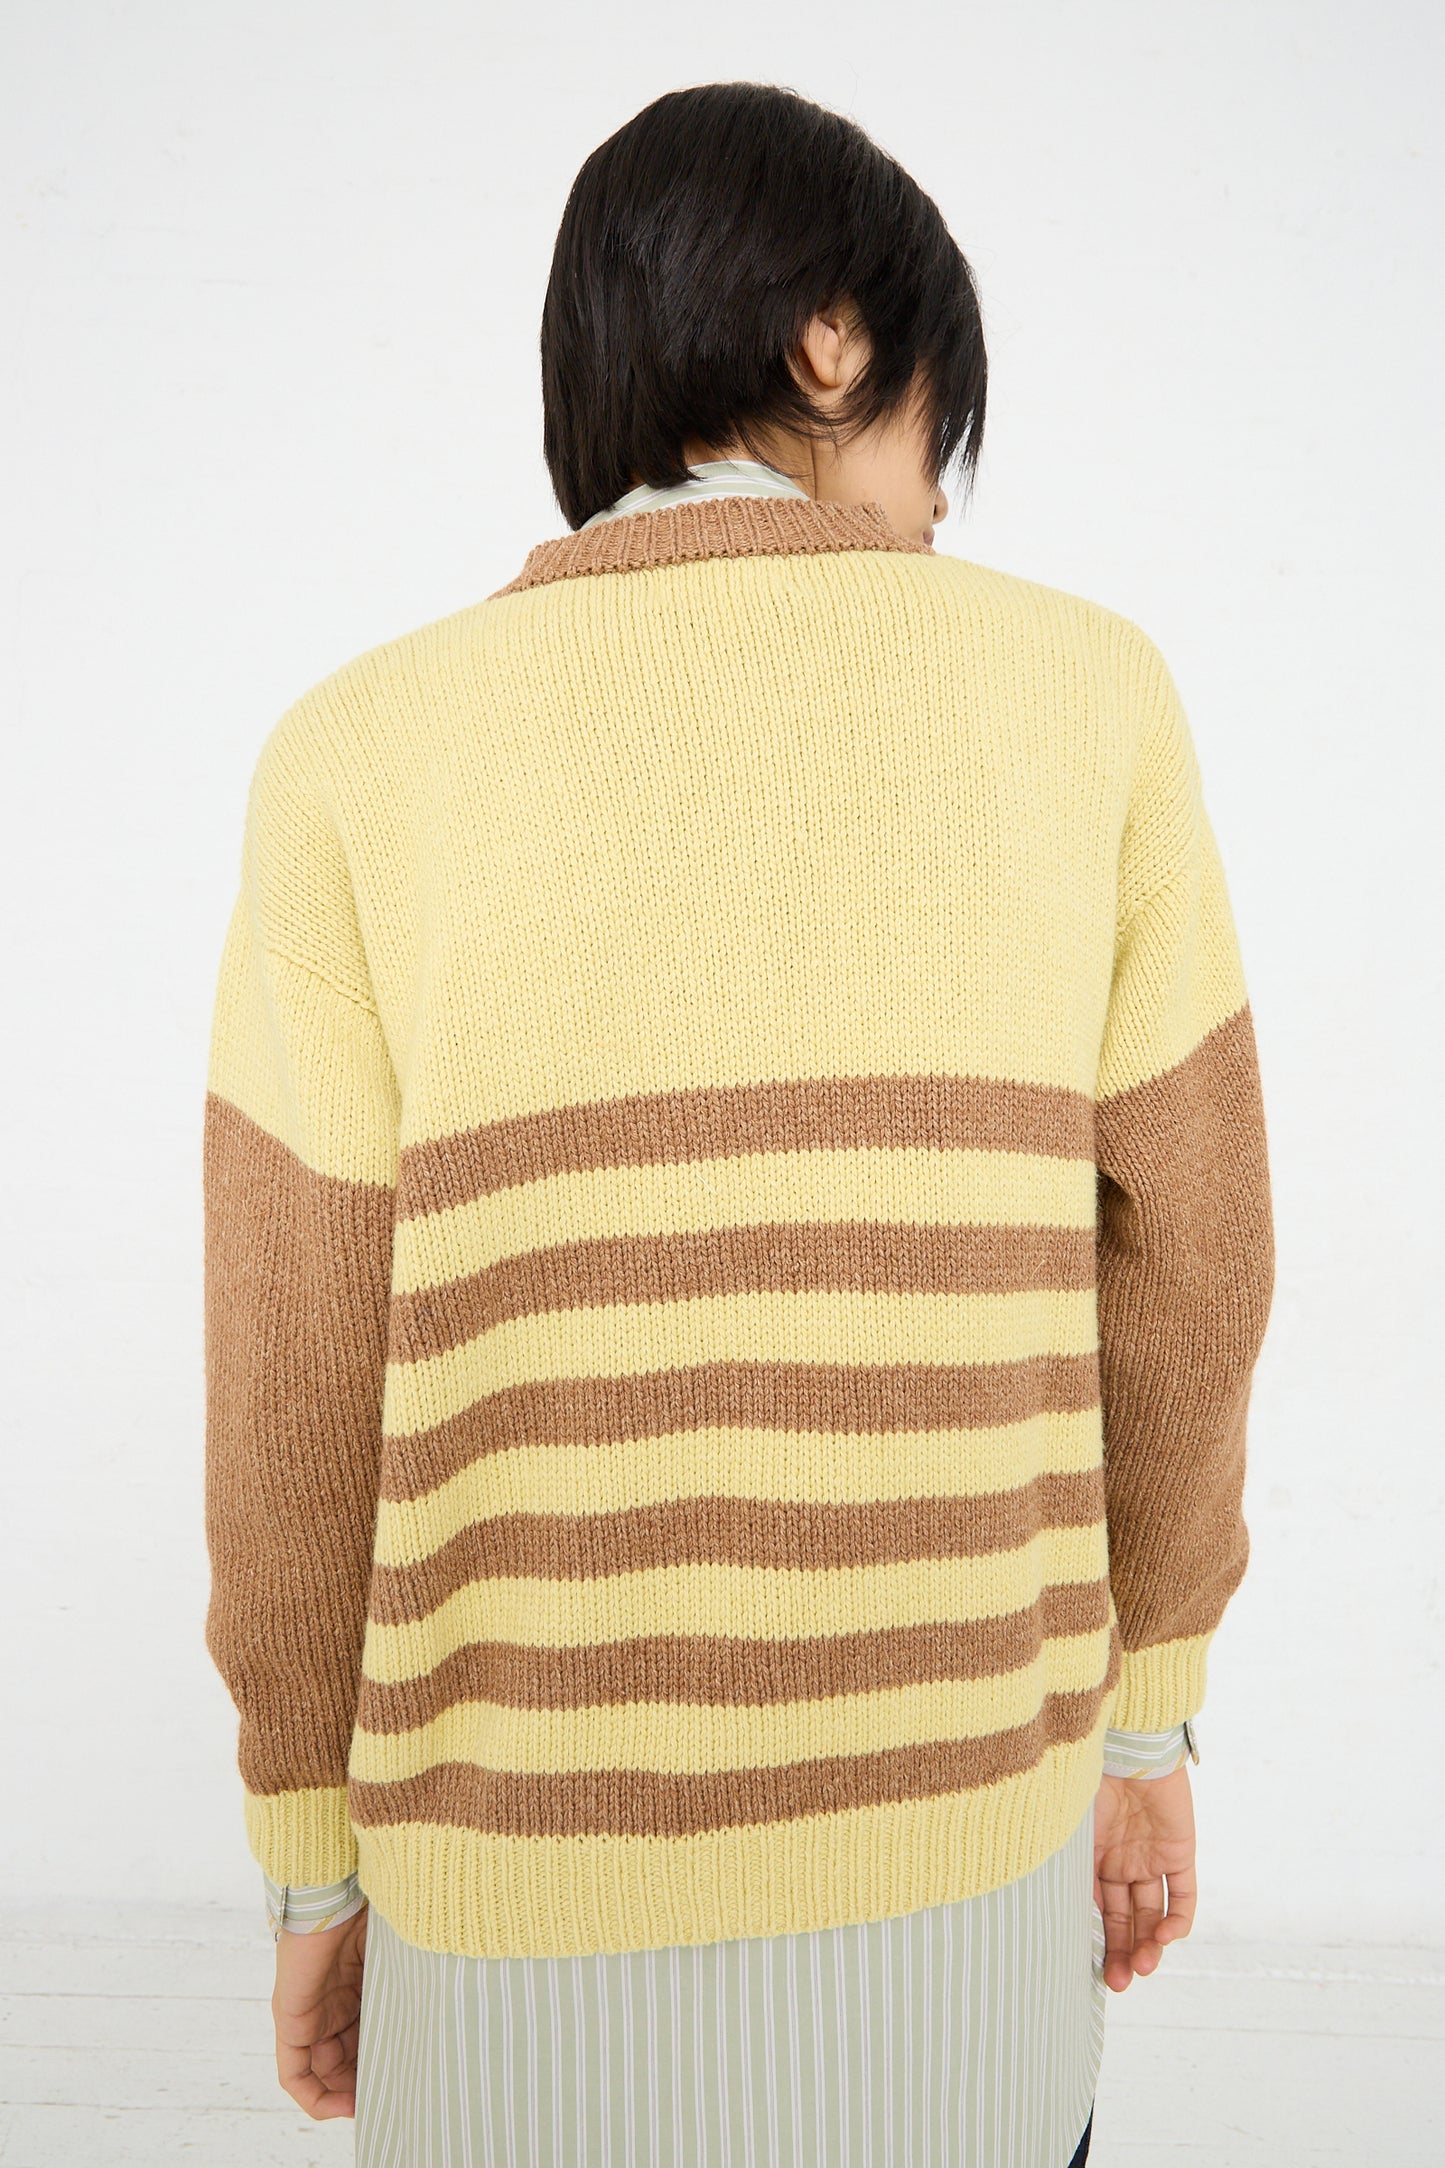 A person seen from behind wearing a Cawley Cotton and Lambswool Textured Stripe Cardigan in Celery and Nutmeg.